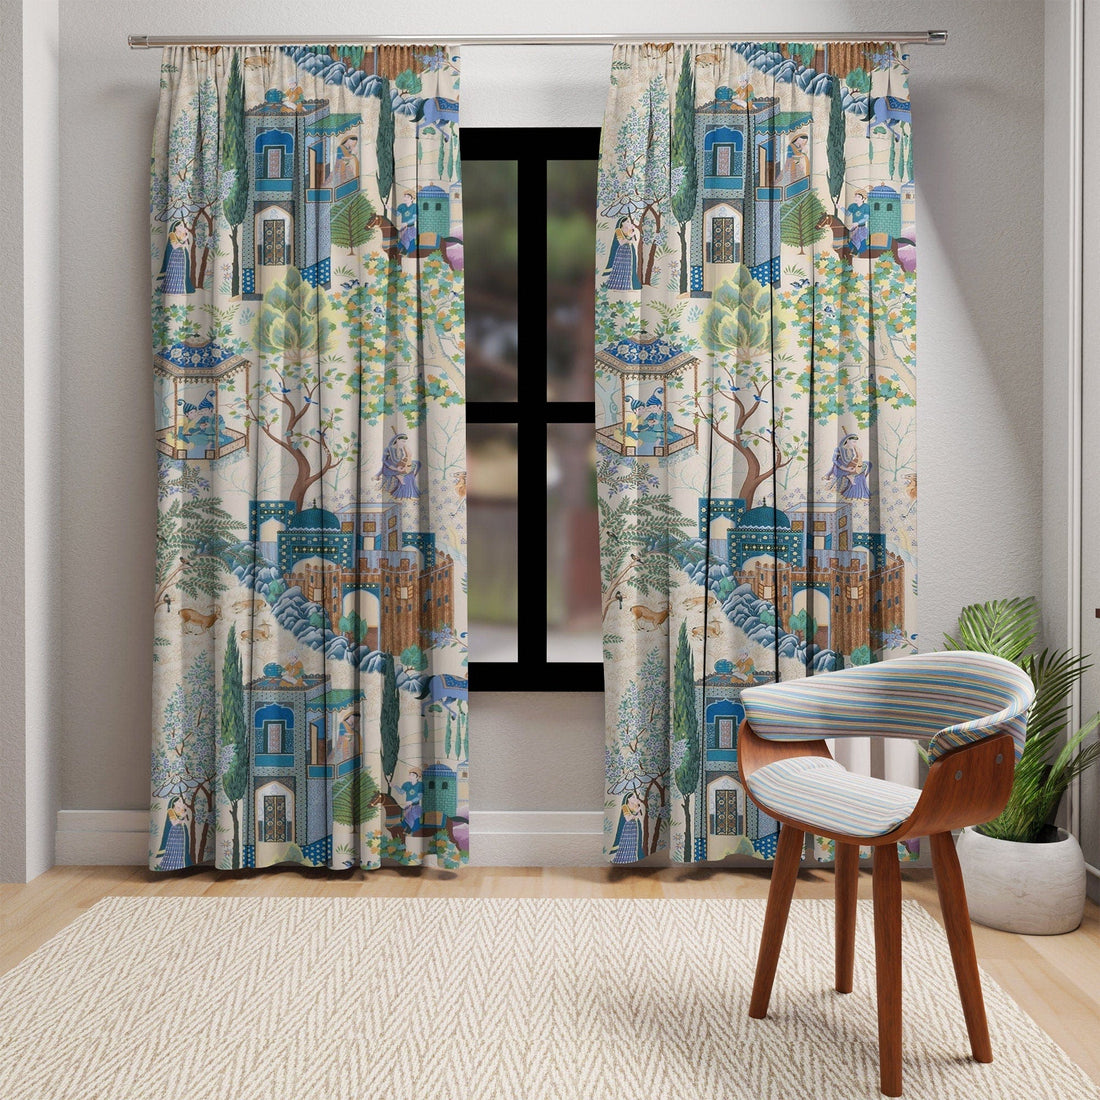 Vintage French Toile De Jouy Window Curtains with Traditional Asian Country Scene, Rustic Chic Blue, Green Floral Print Window Coverings